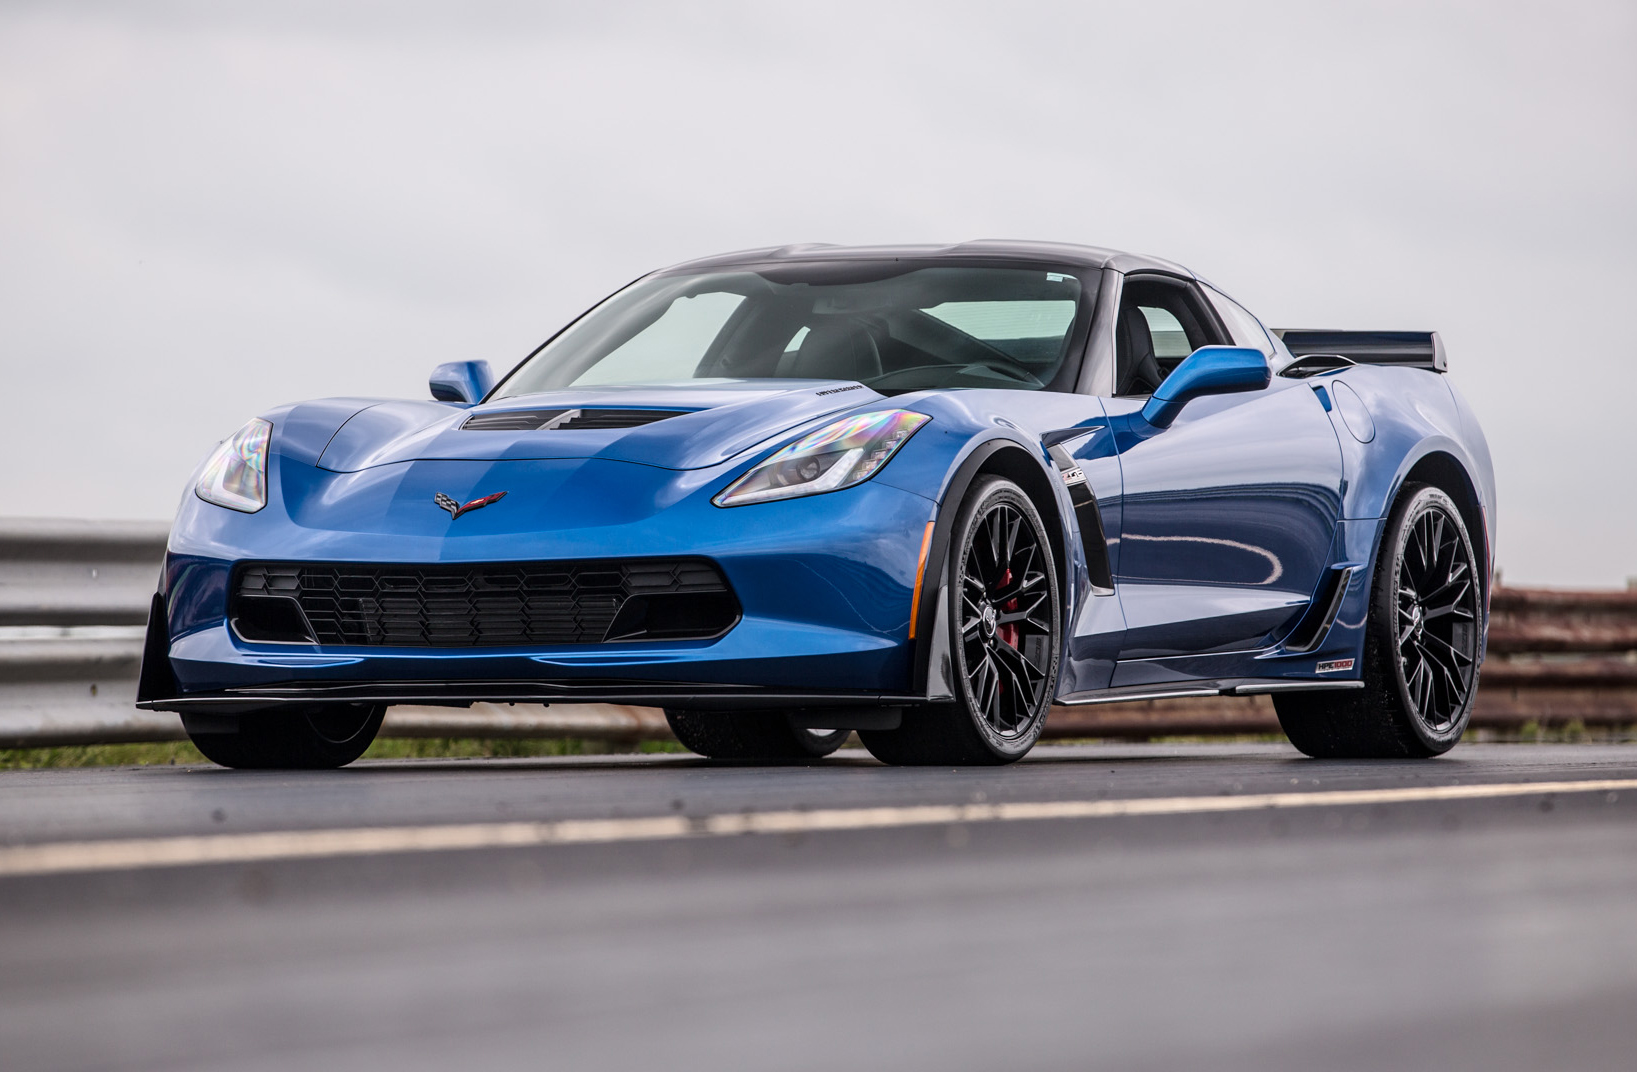 Nice Images Collection - Chevrolet Corvette Z06 Hennessey Hpe1000 Supercharged - HD Wallpaper 